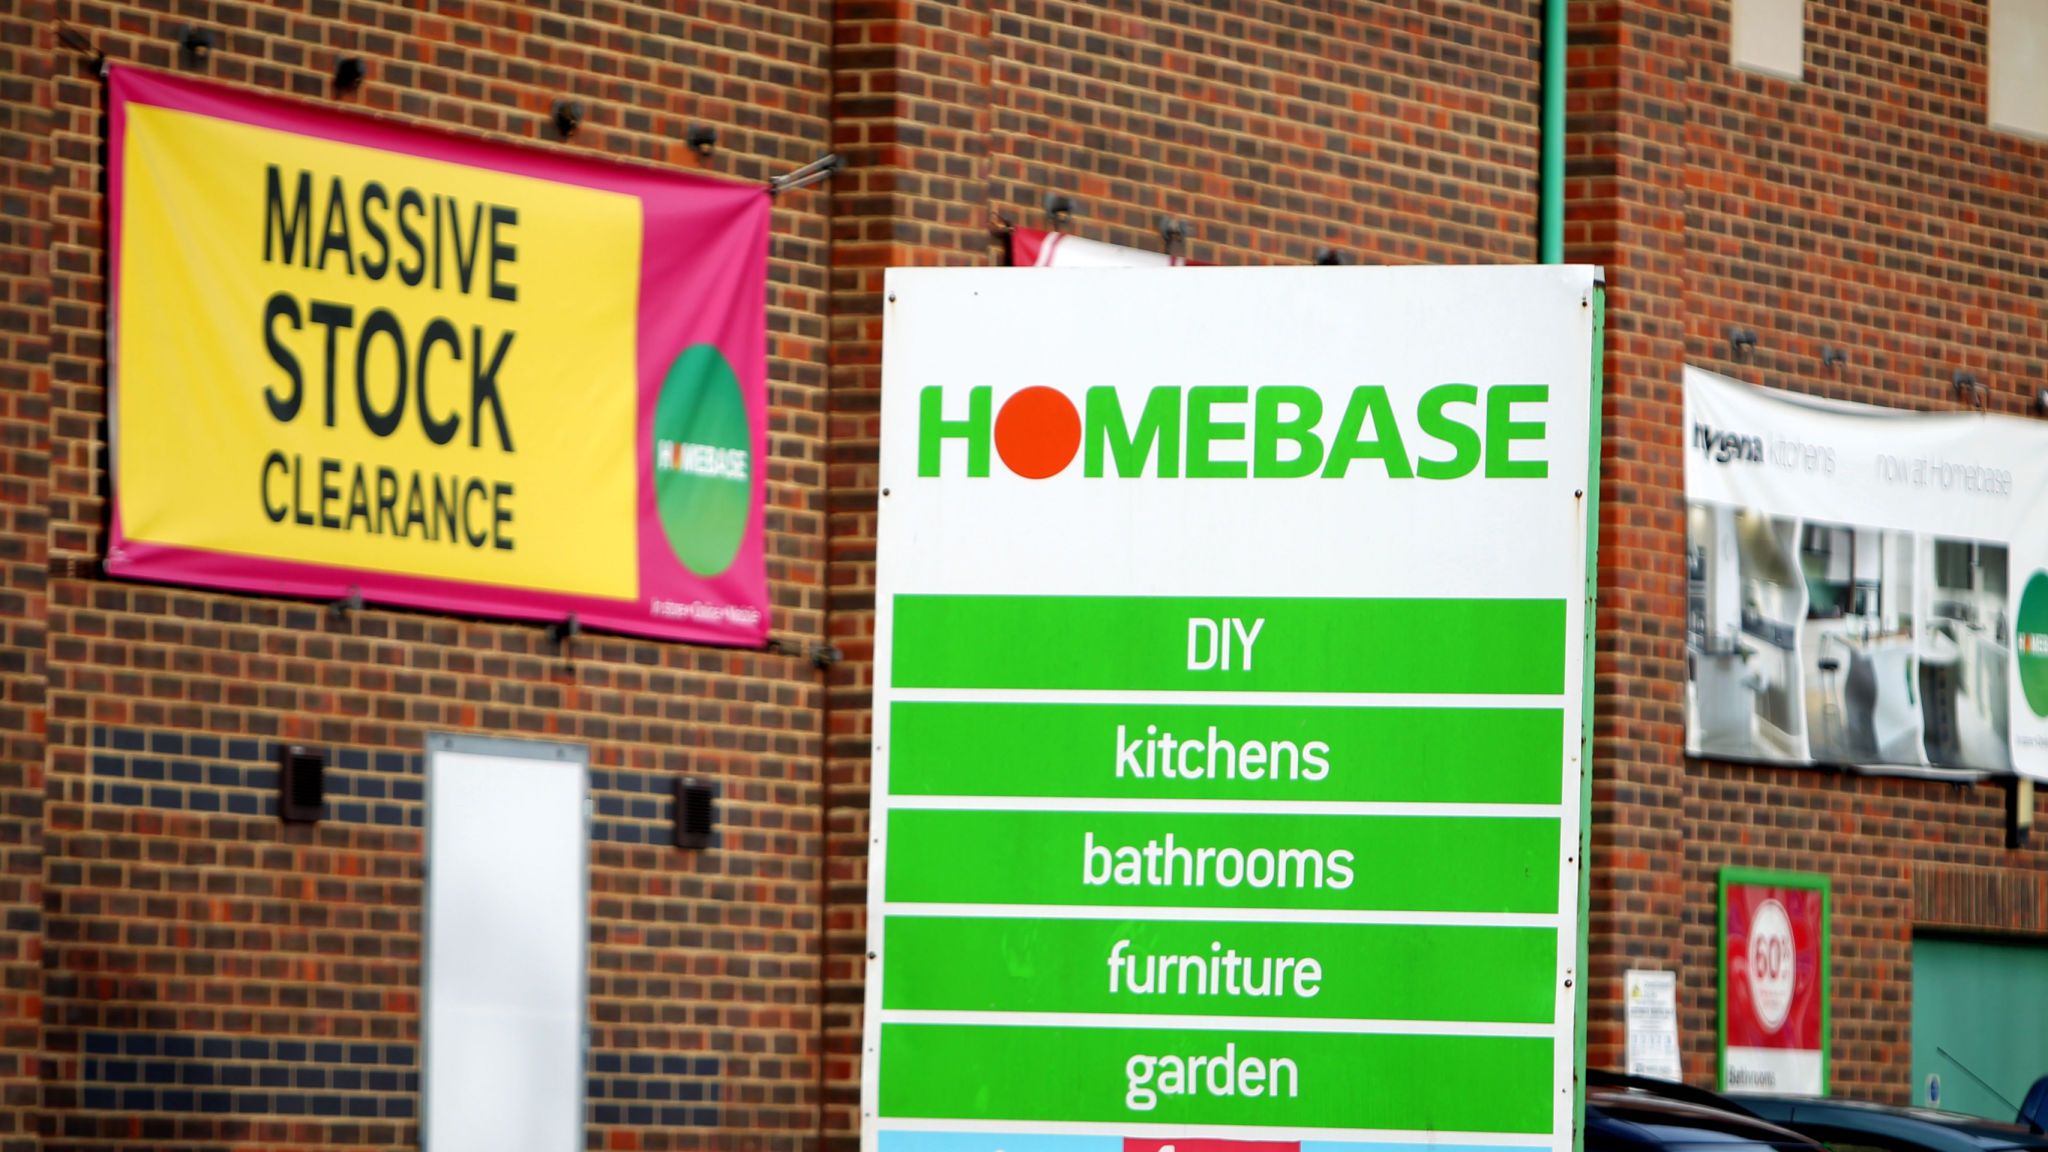 S Australian Owners Want To Offload It - Homebase - HD Wallpaper 